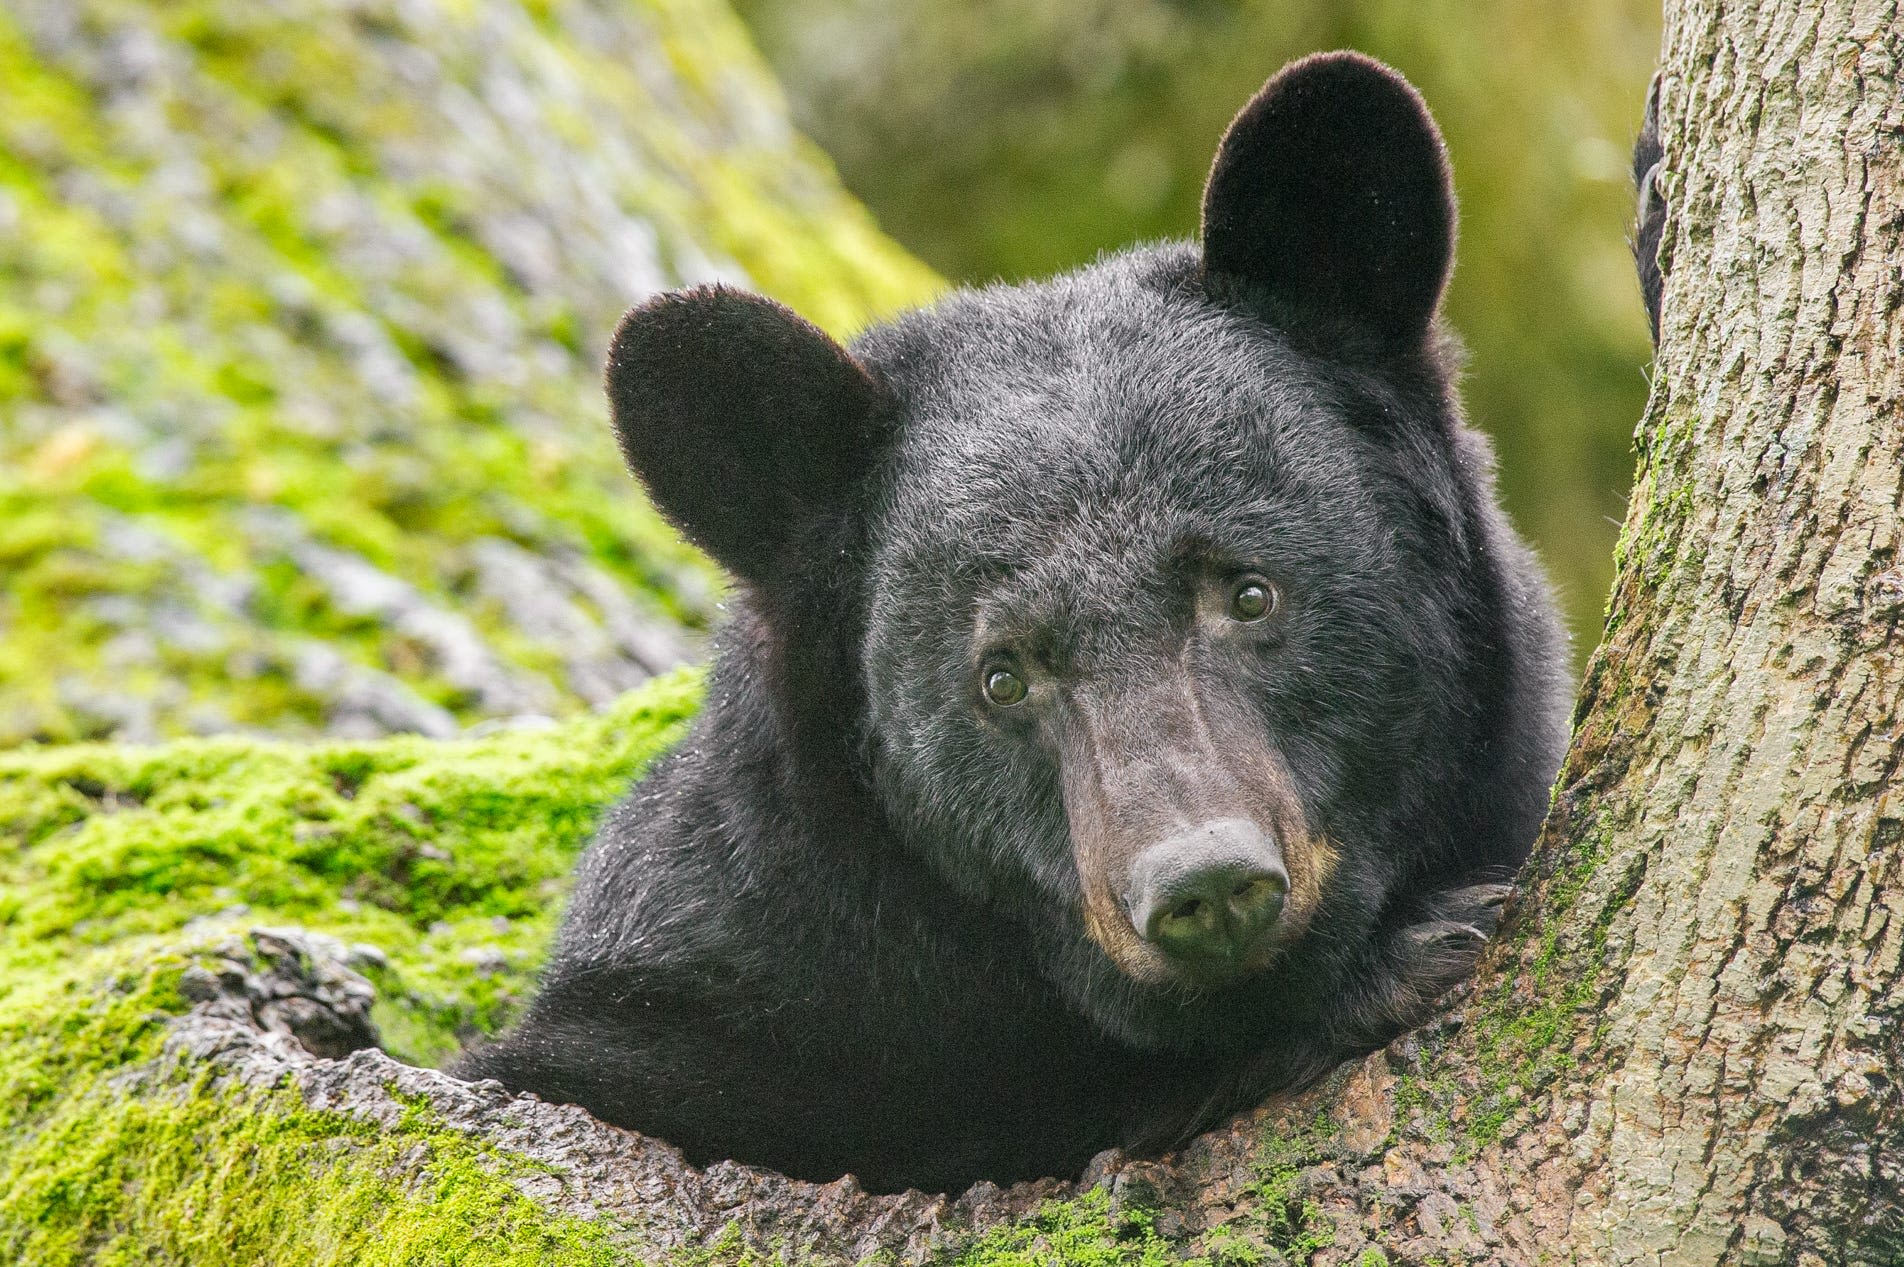 NC Wildlife higher license fees start July 1, new rules could expand bear hunting season